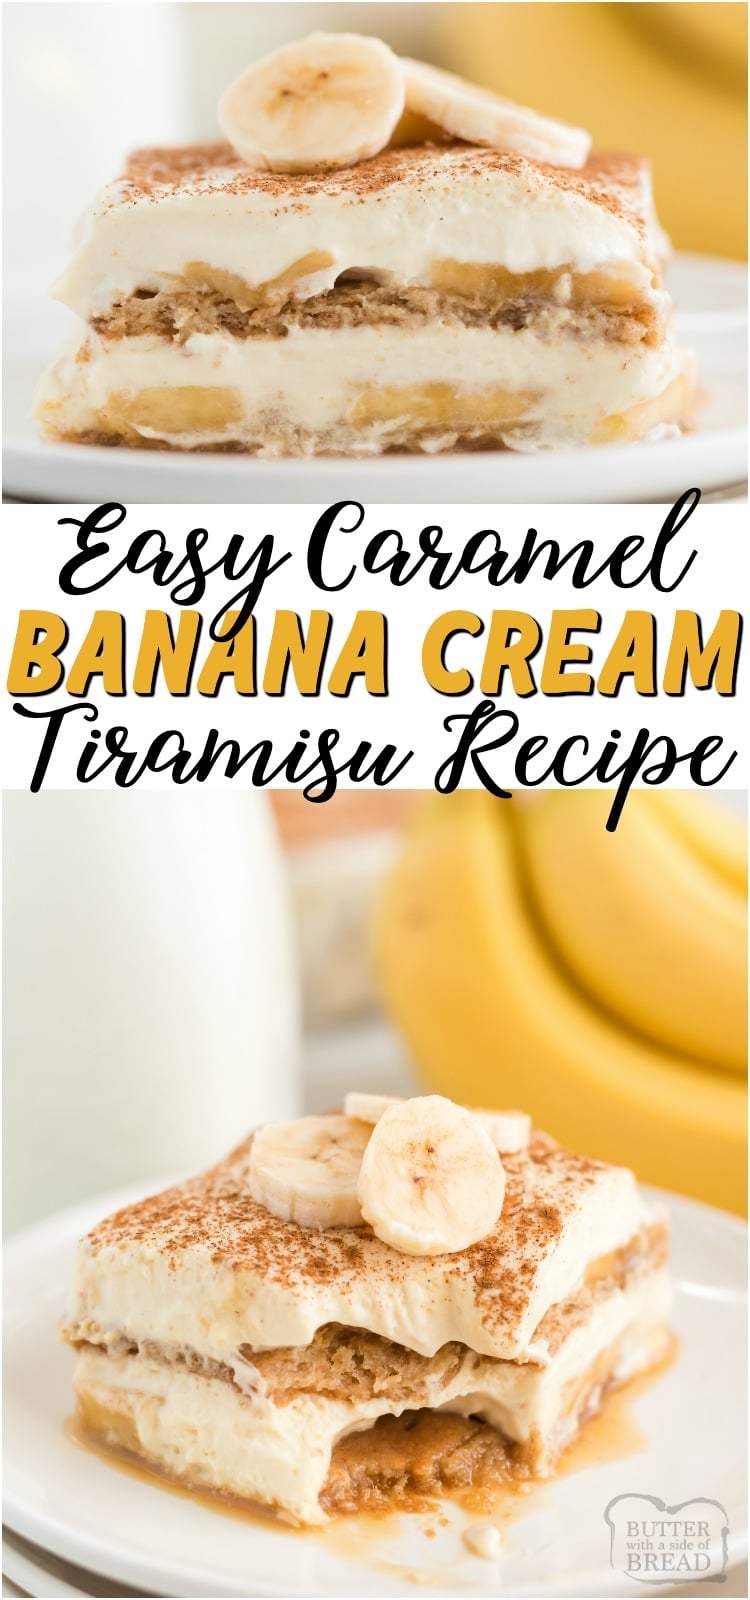 Easy recipe for Caramel Banana Cream Tiramisu that uses graham crackers and a pudding-caramel mixture in layers. Comes together so fast & is delicious! #banana #caramel #tiramisu #layered #dessert #icebox #recipe from BUTTER WITH A SIDE OF BREAD